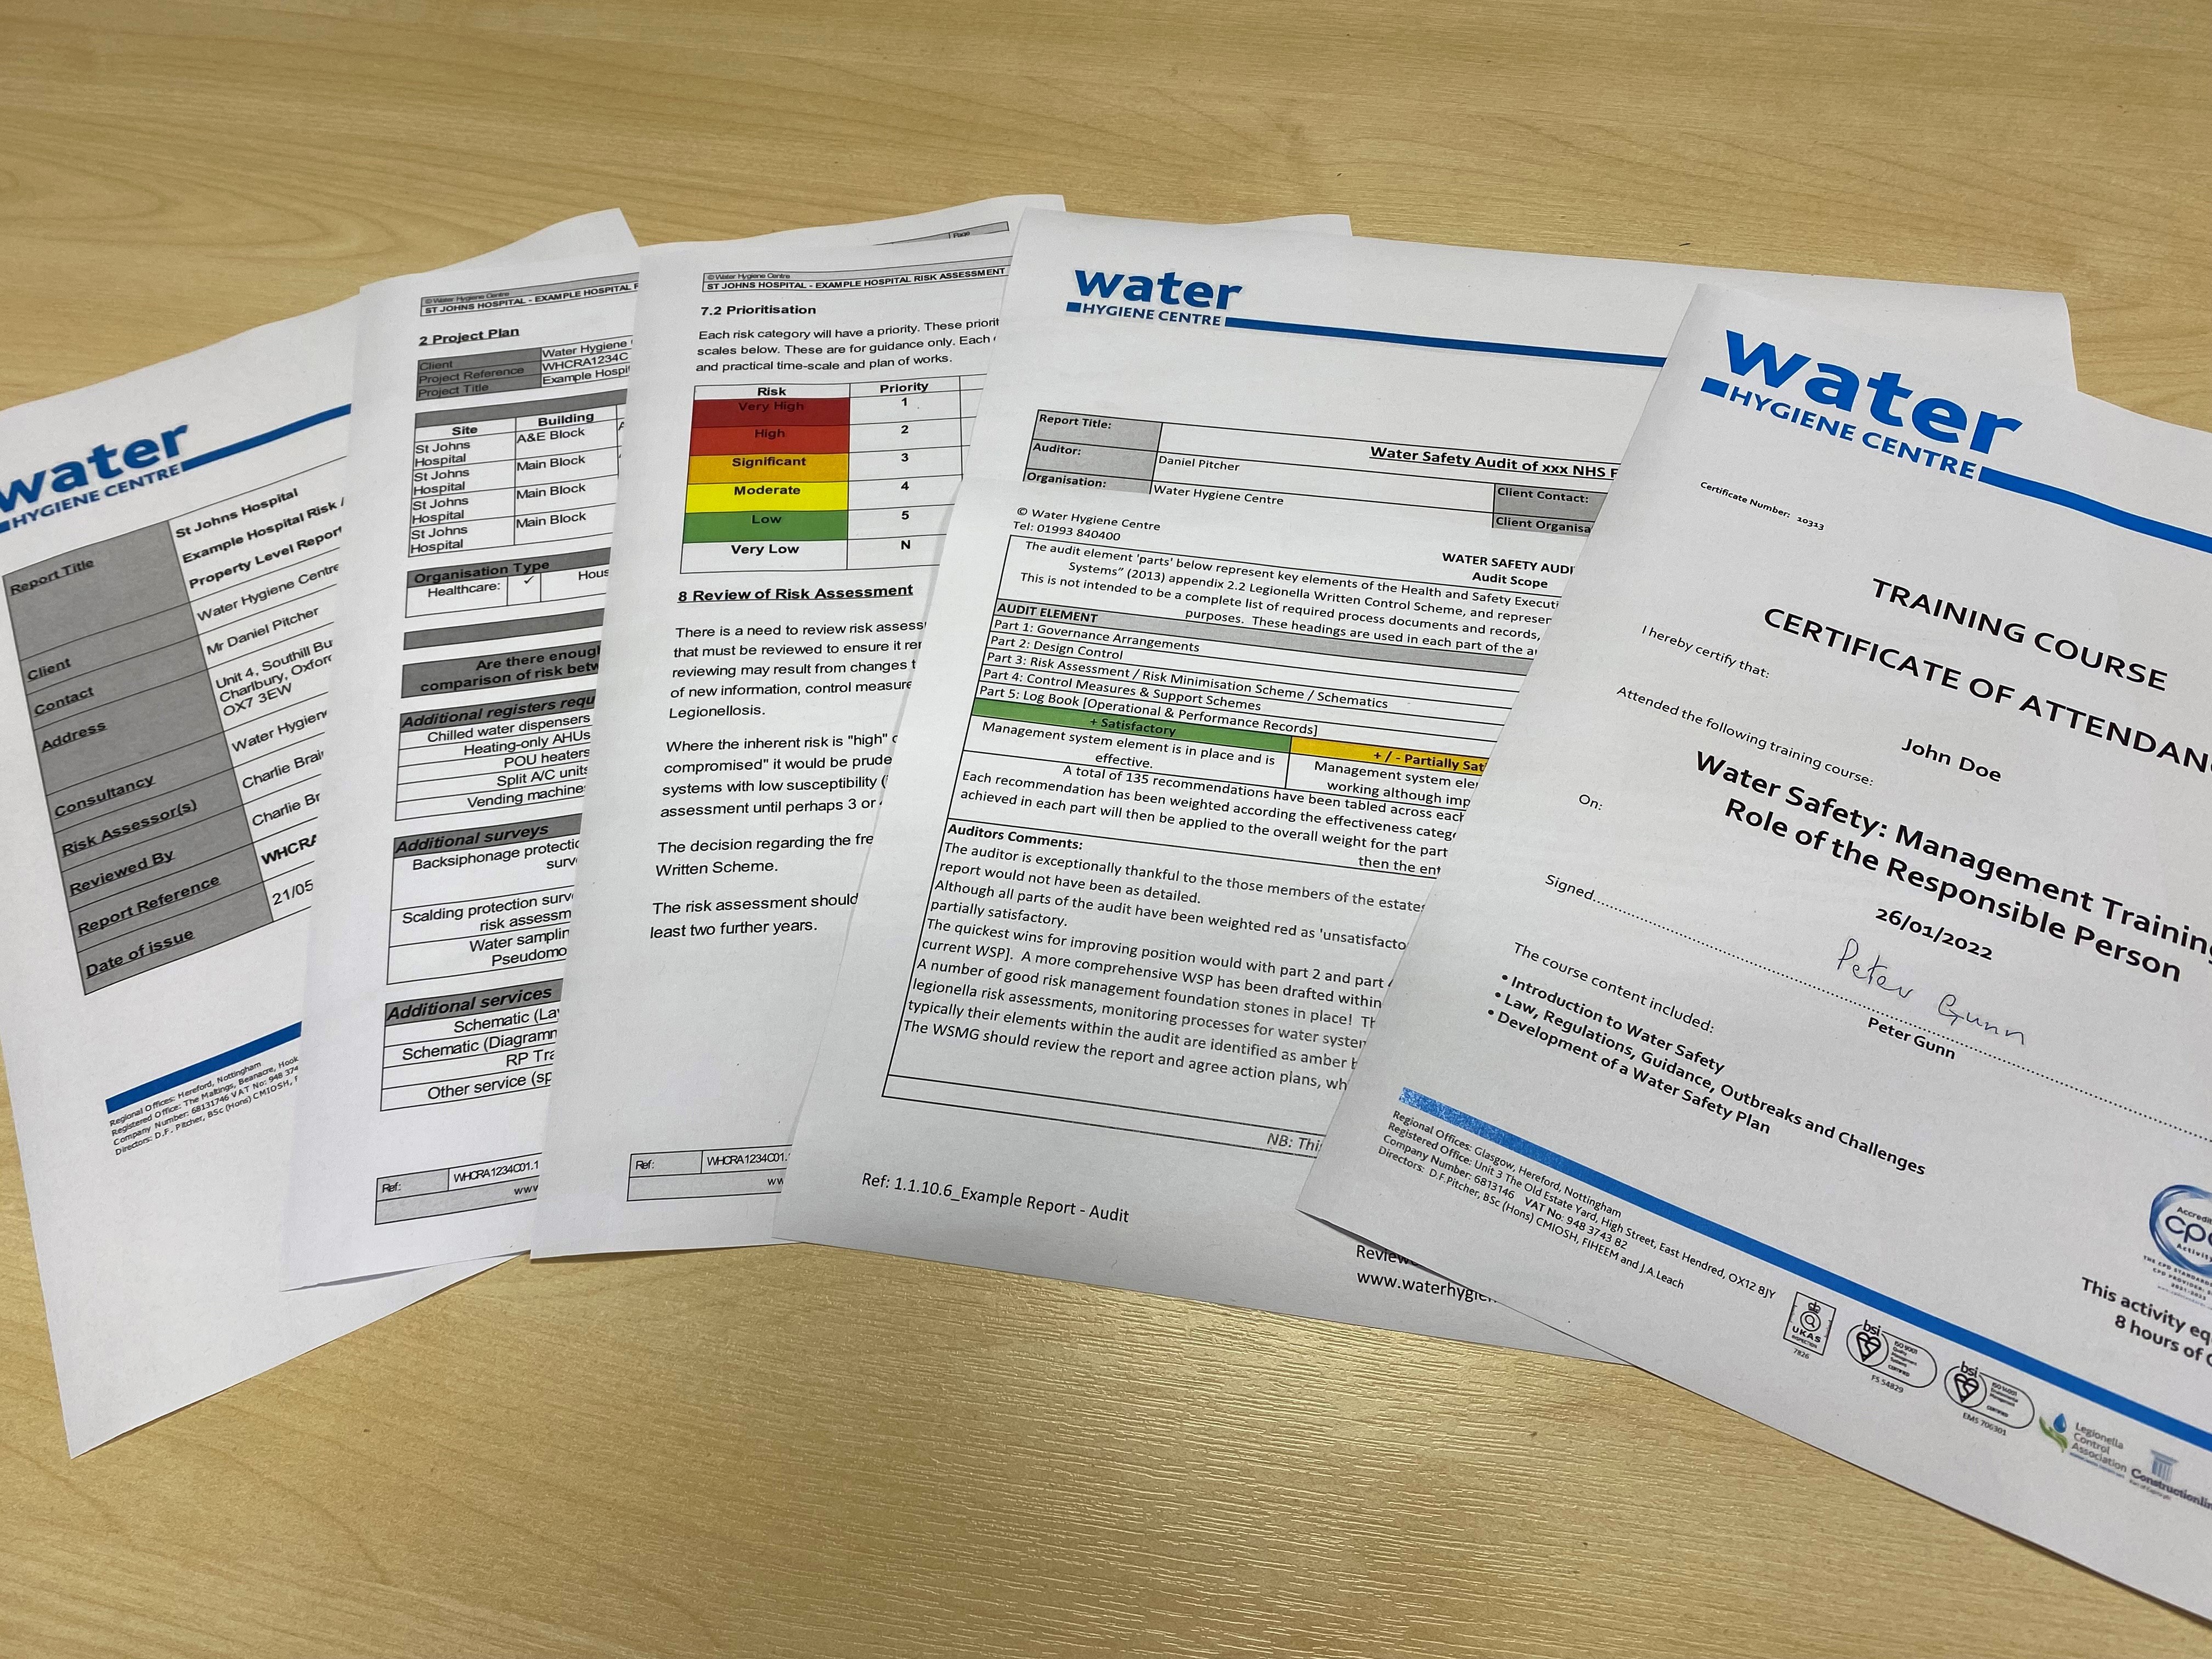 pieces of paper on a table with documents by 'water hygiene centre'